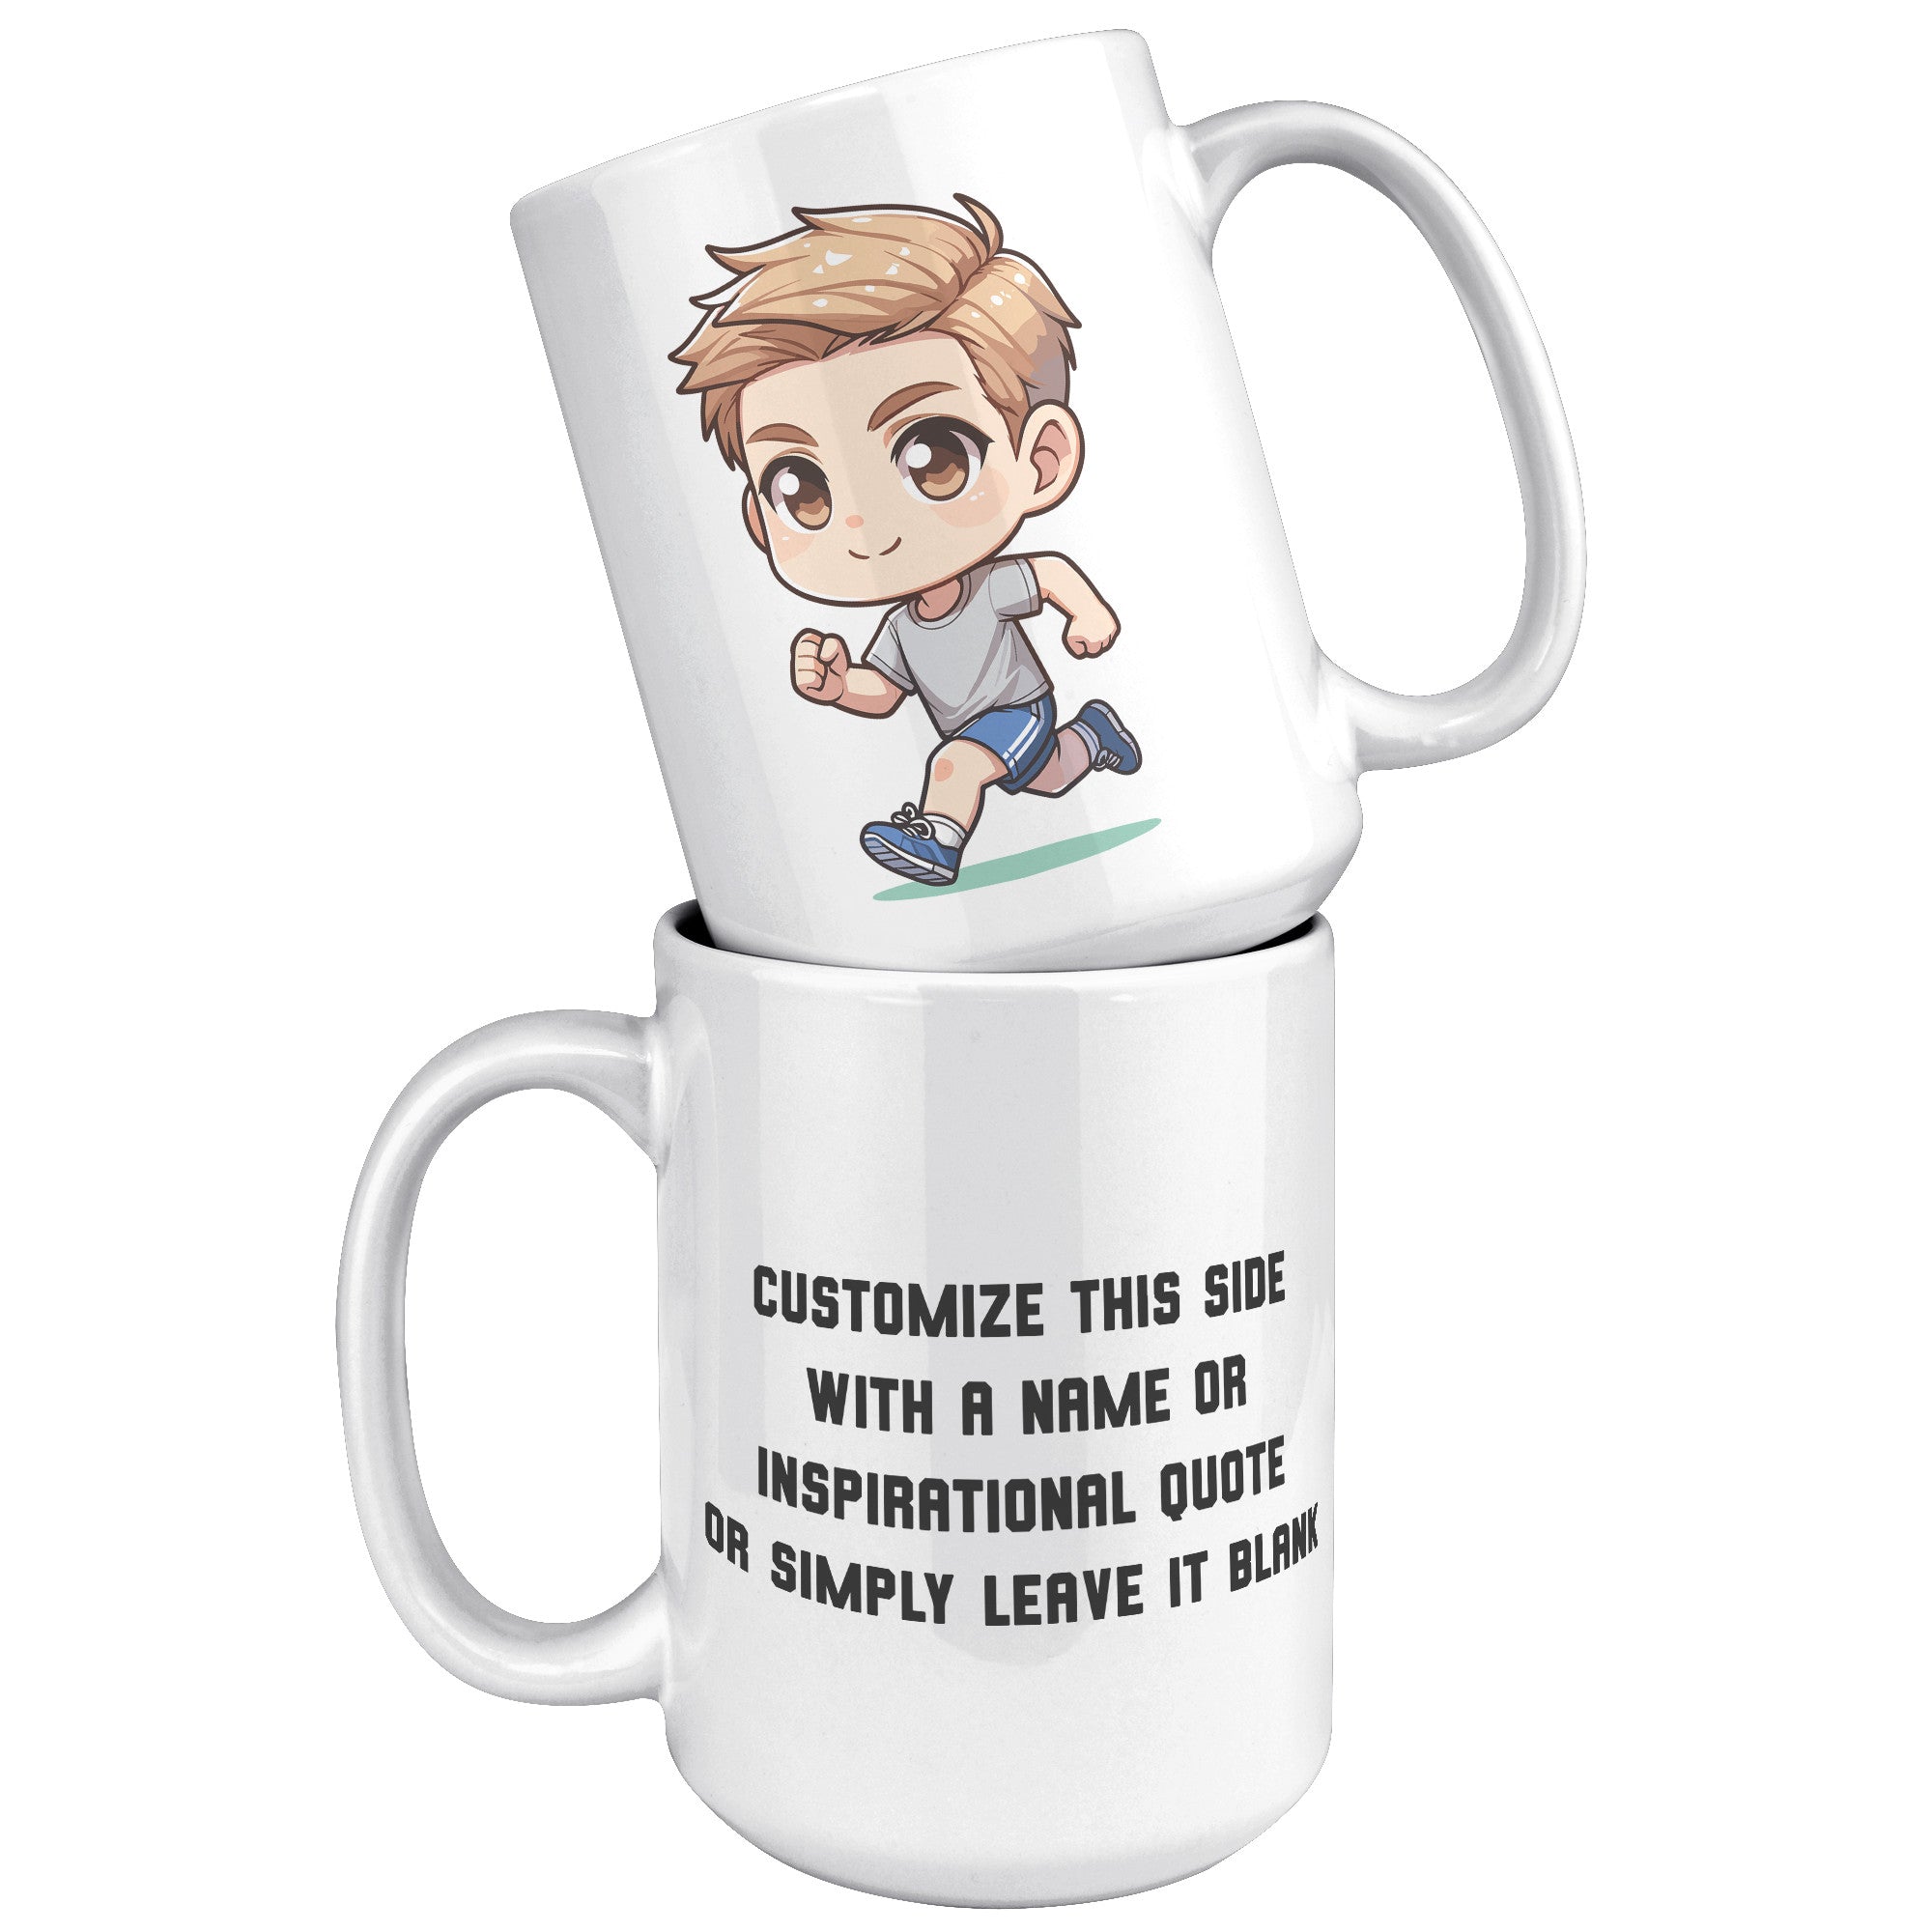 Male Runner Inspirational Mug - Motivational Running Quotes Cup - Perfect Gift for Marathon Men - Runner's Daily Dose of Determination - E1